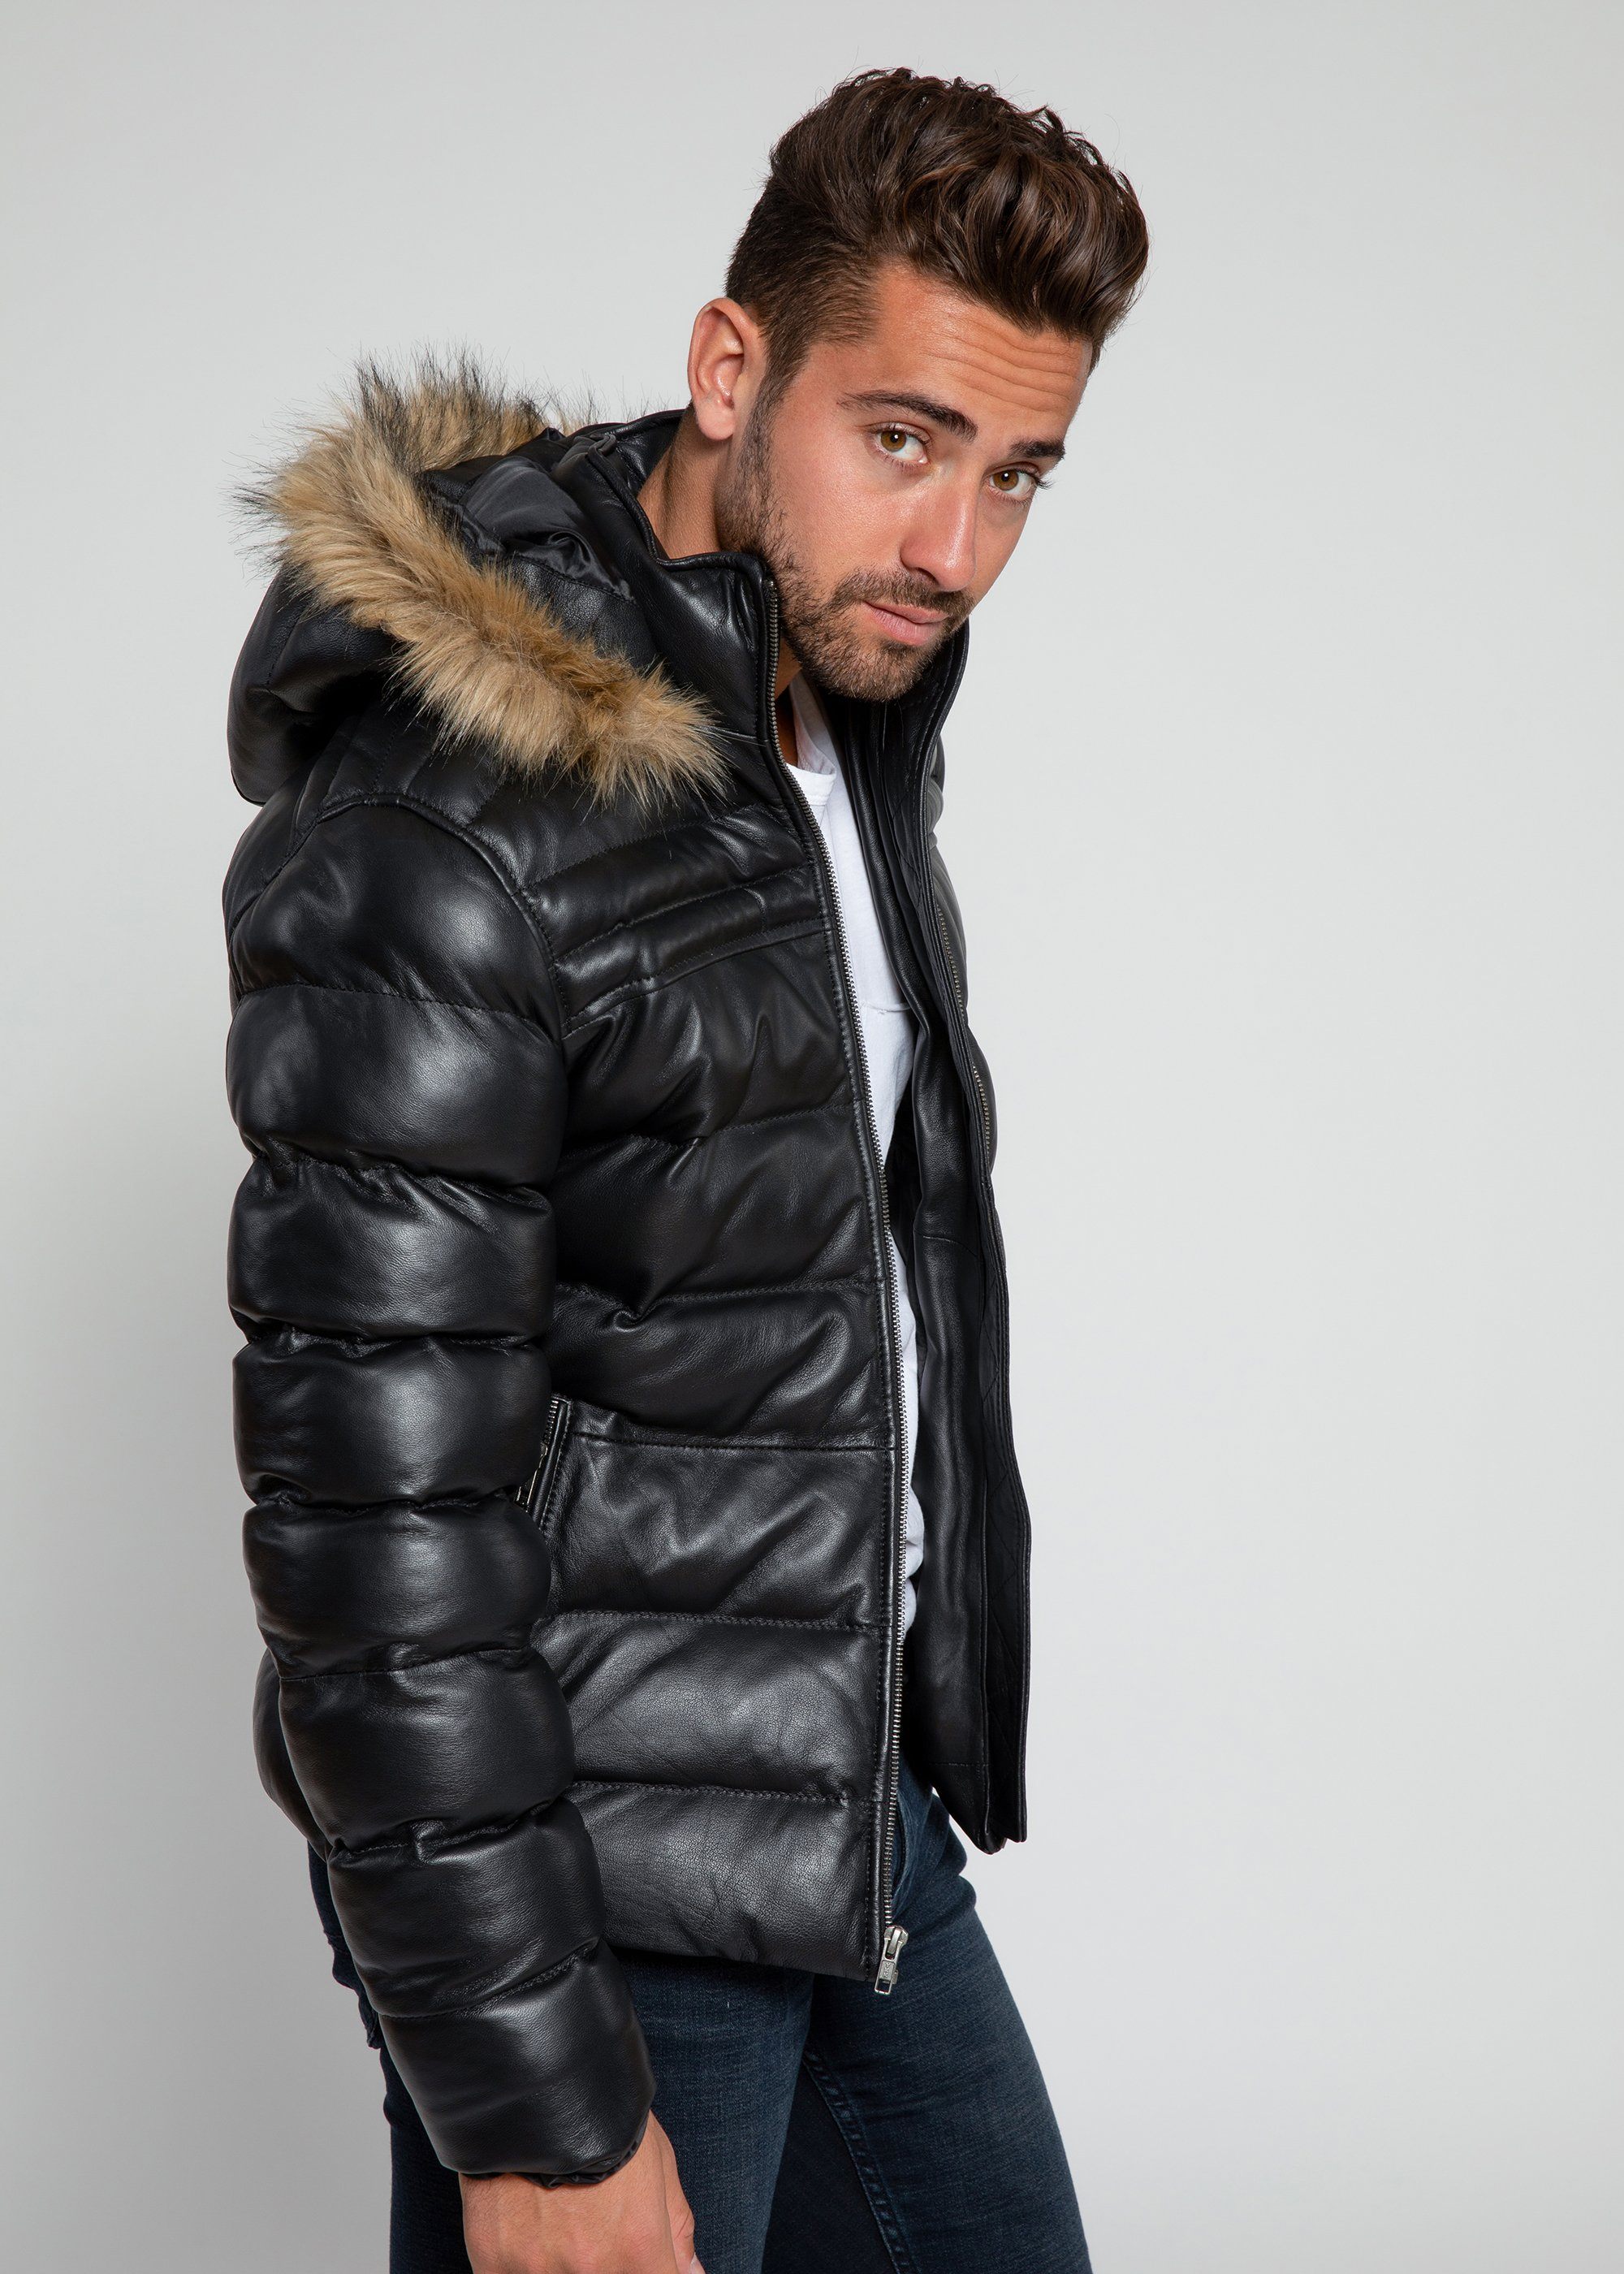 Leather Jacket - Men's Crimson Black Puffer Winter Down Leather Jacket With Fur